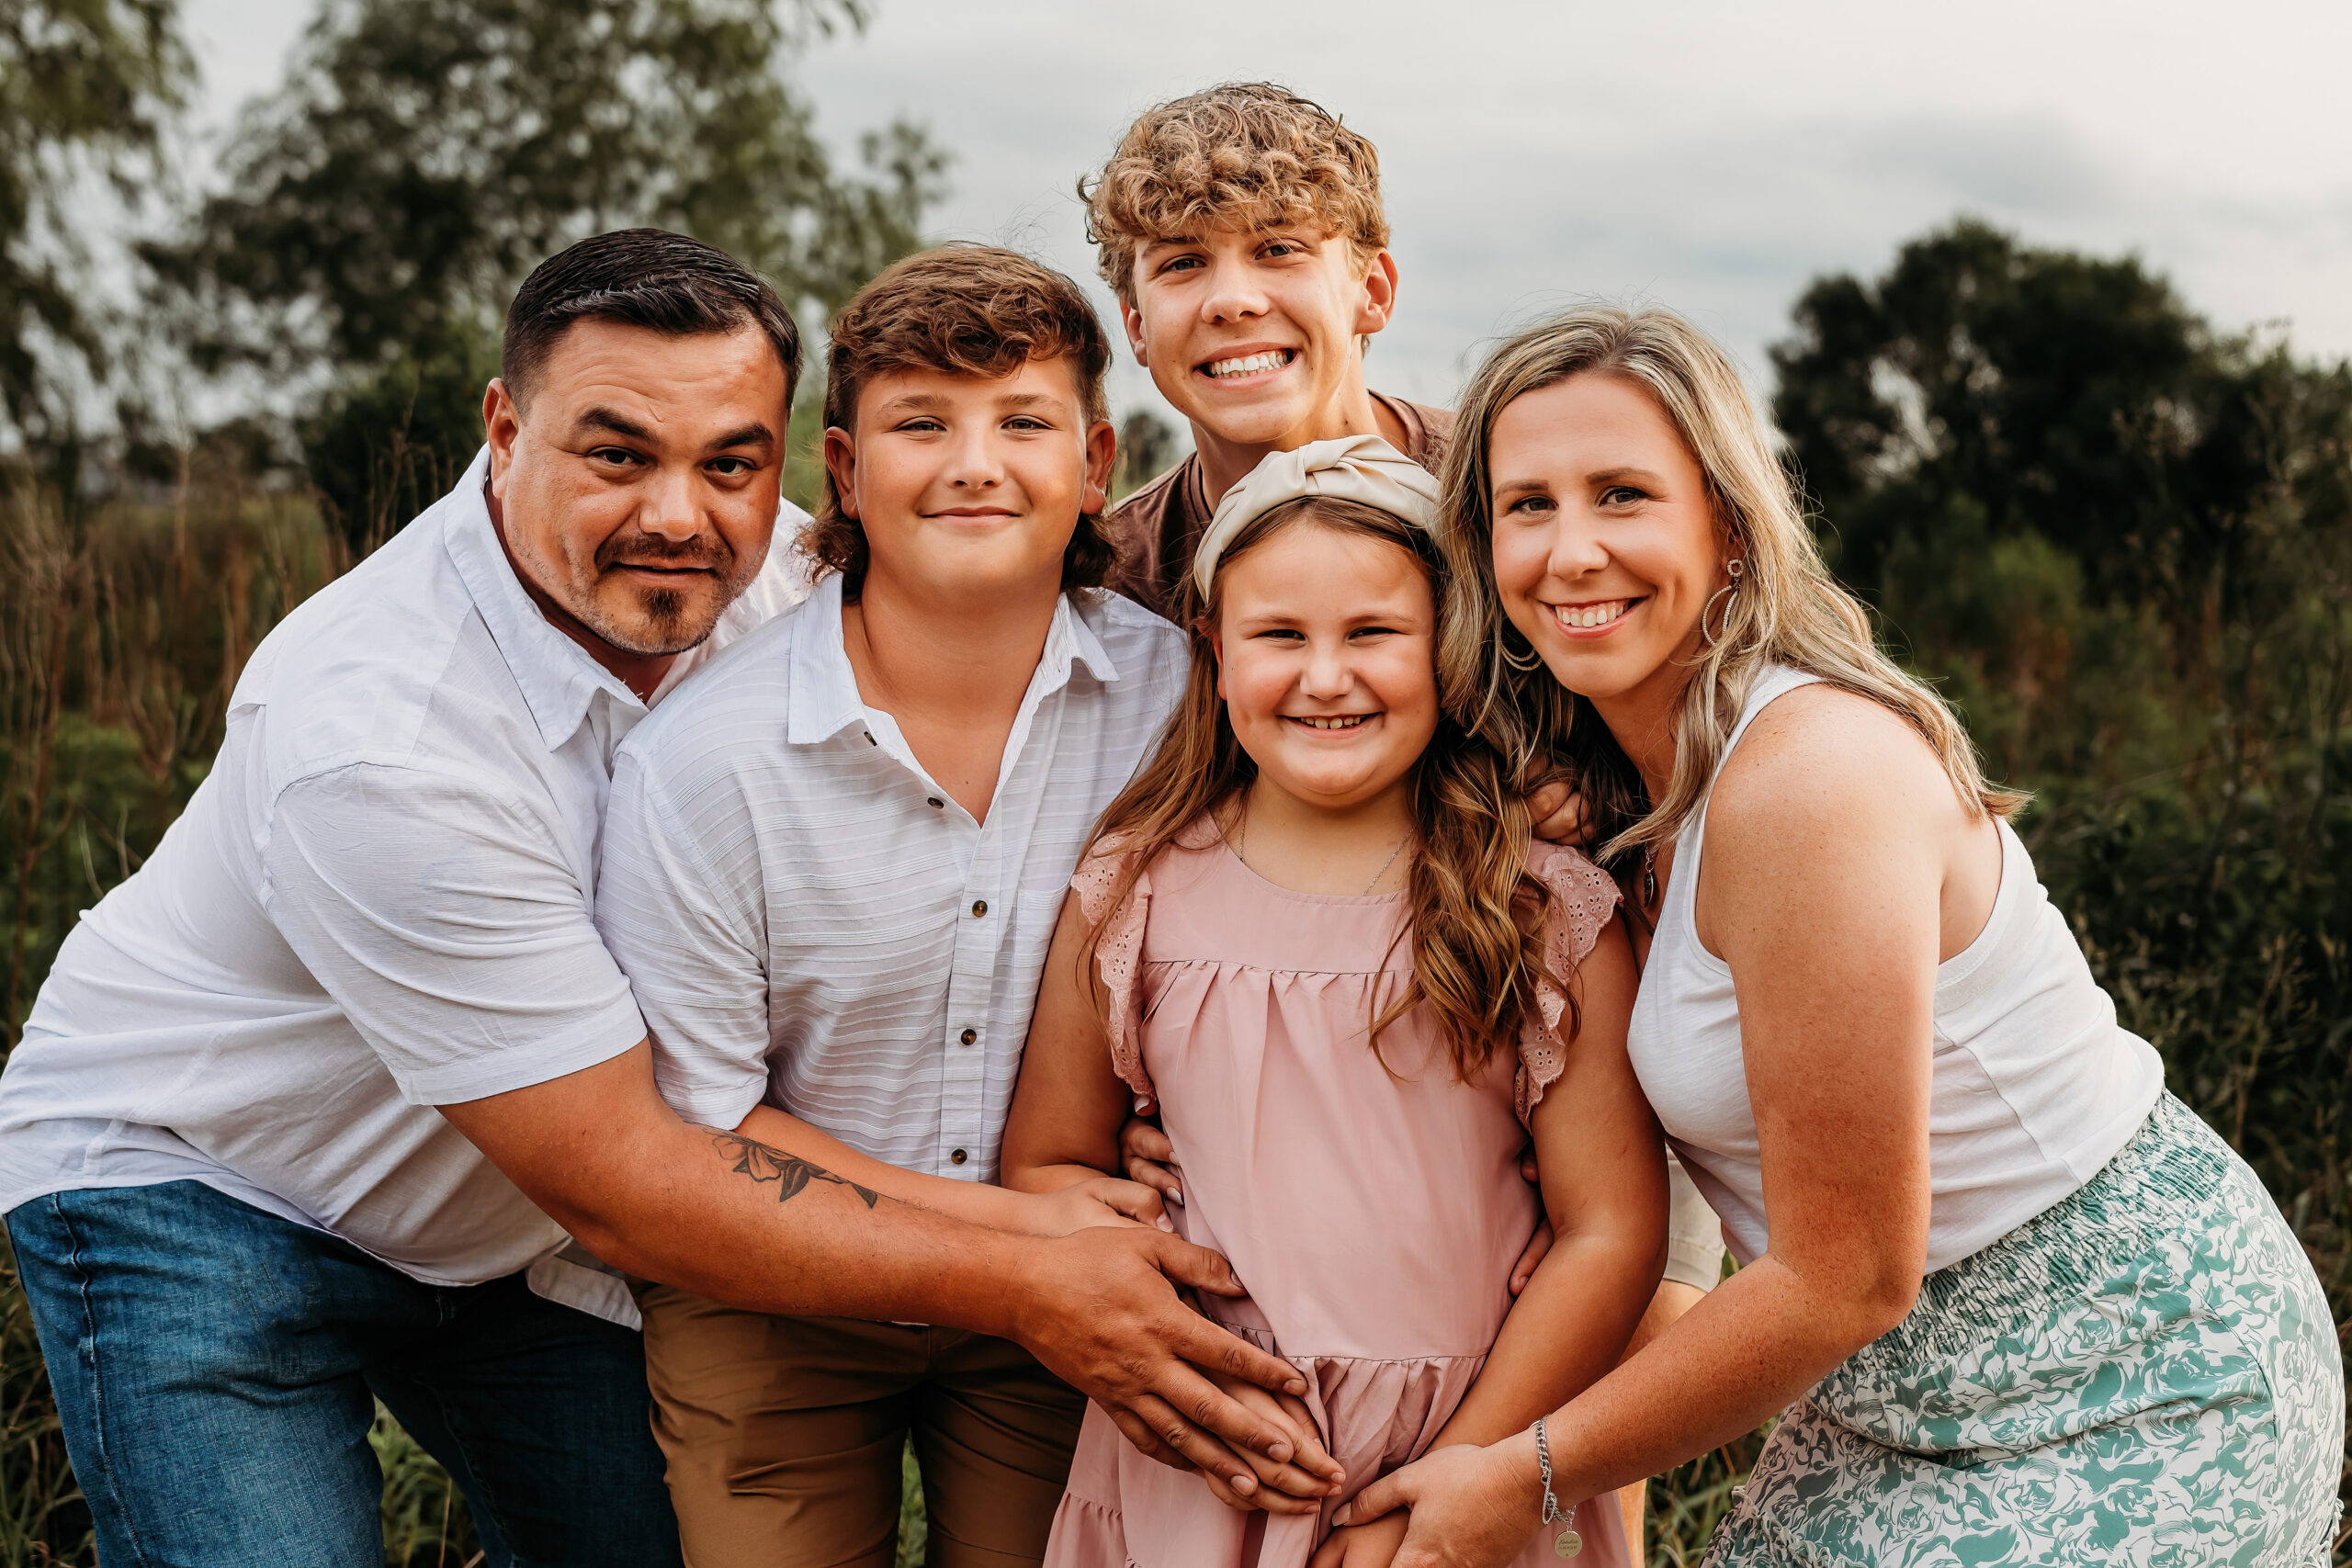 Old Navy Pearland is a huge hit amongst this family for their photos with Ally's Photography